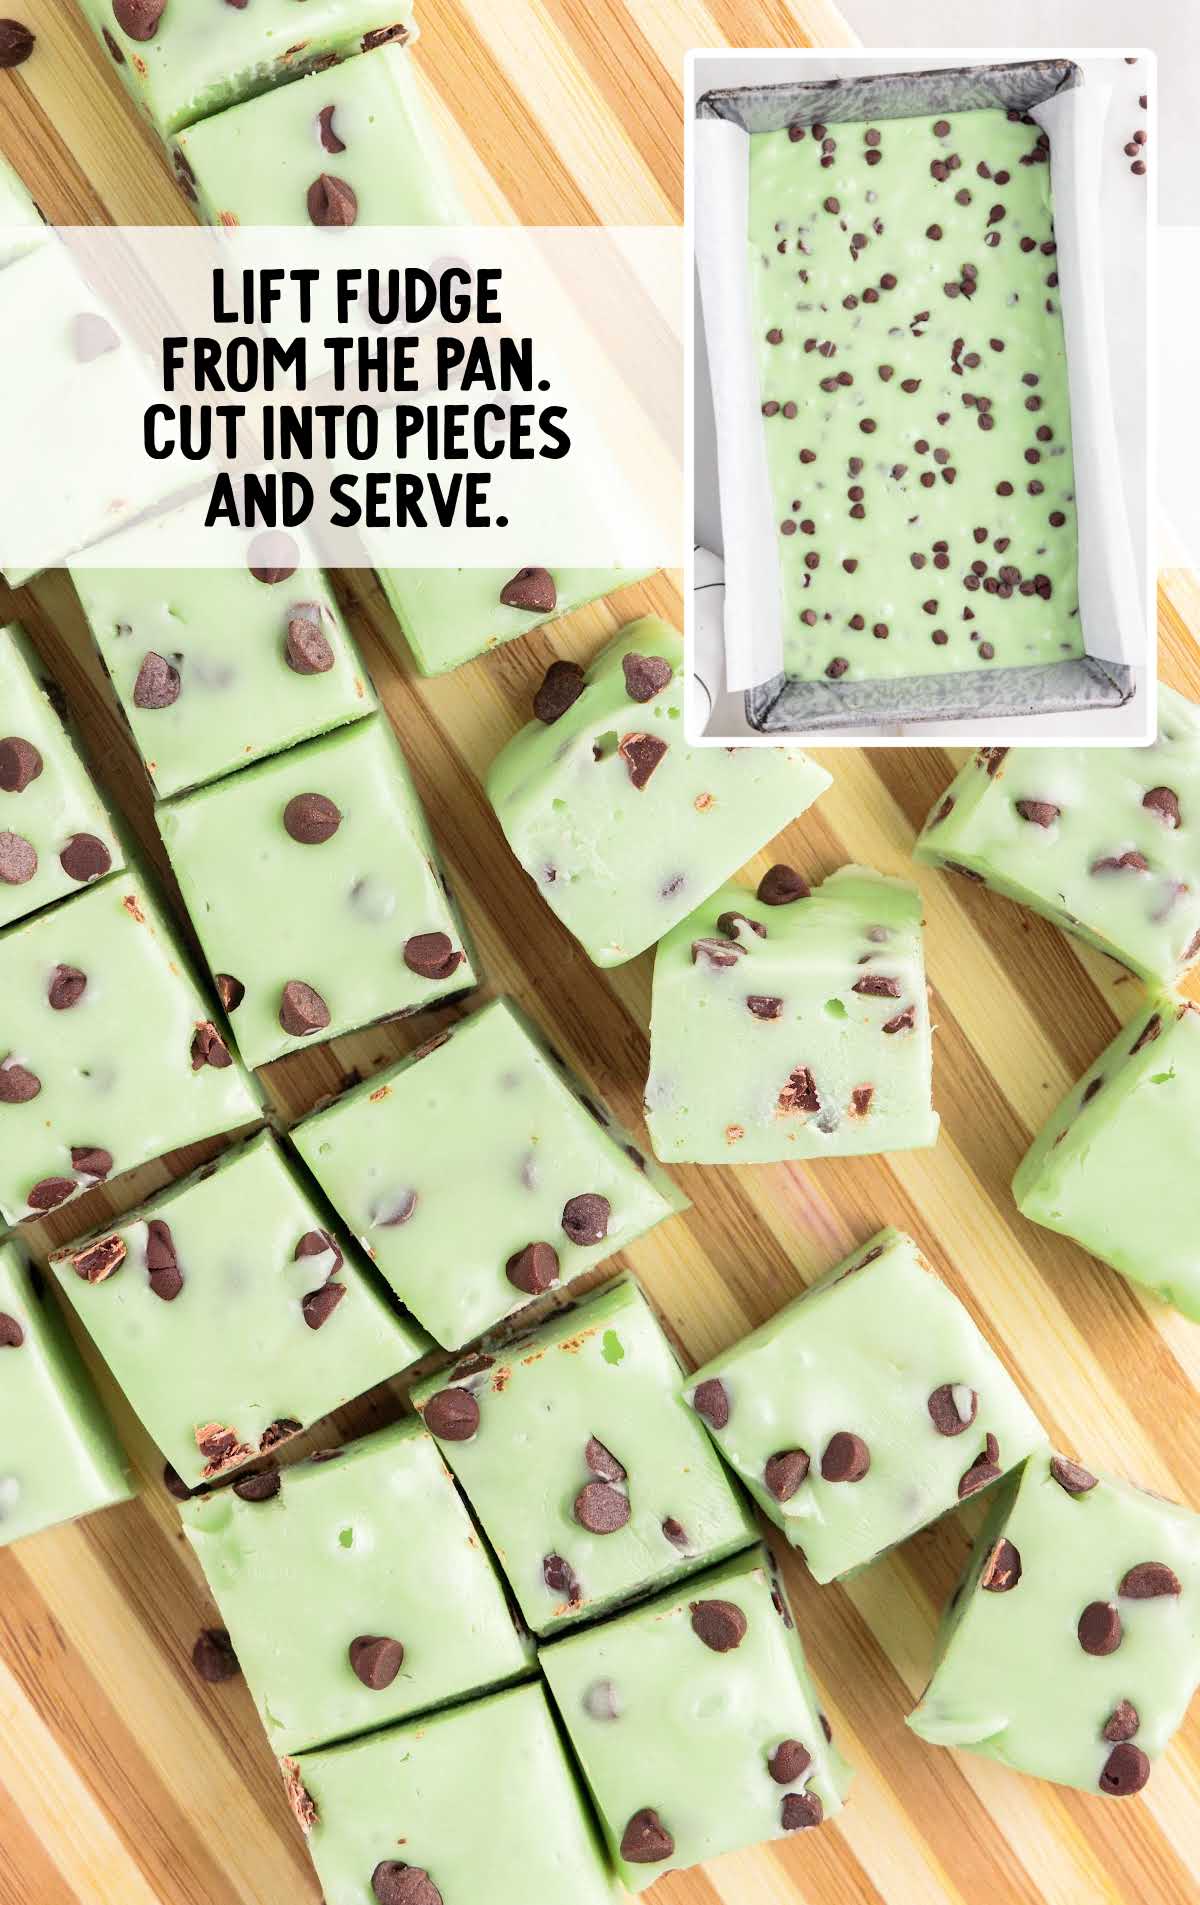 fudge lifted from the pan and then cut into pieces on a wooden board